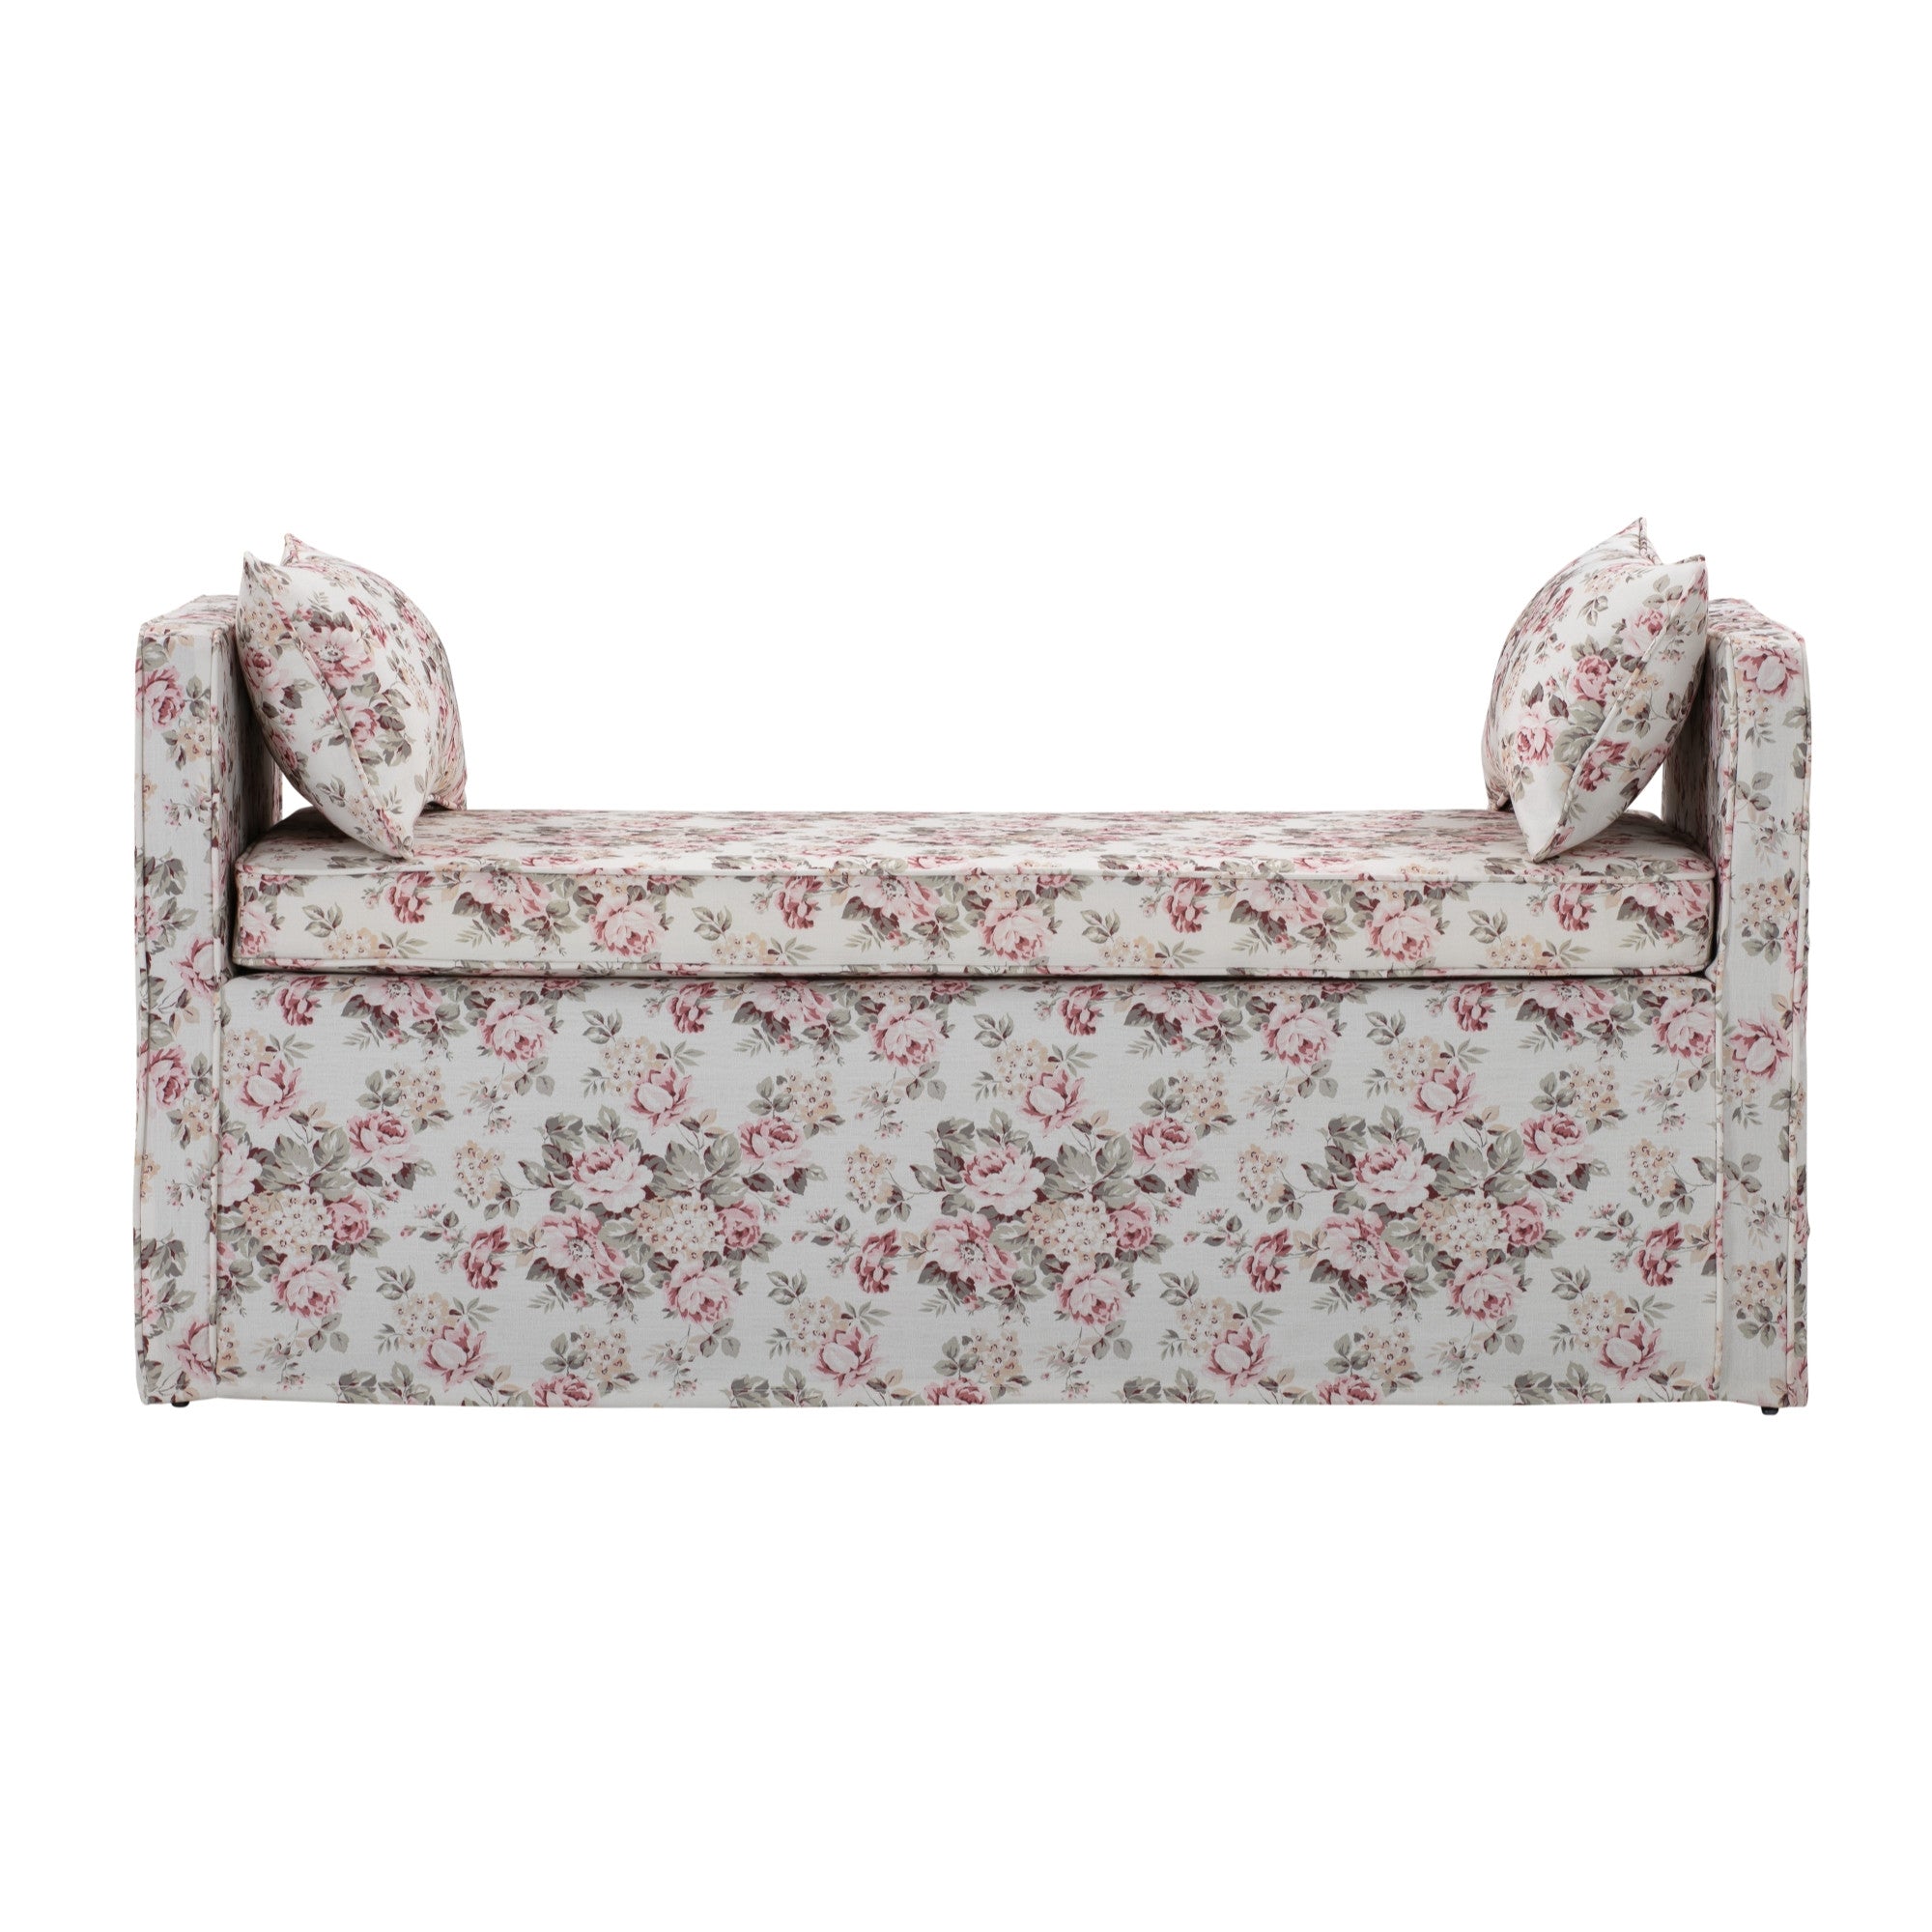 53" Red And Black Upholstered Linen Floral Bench